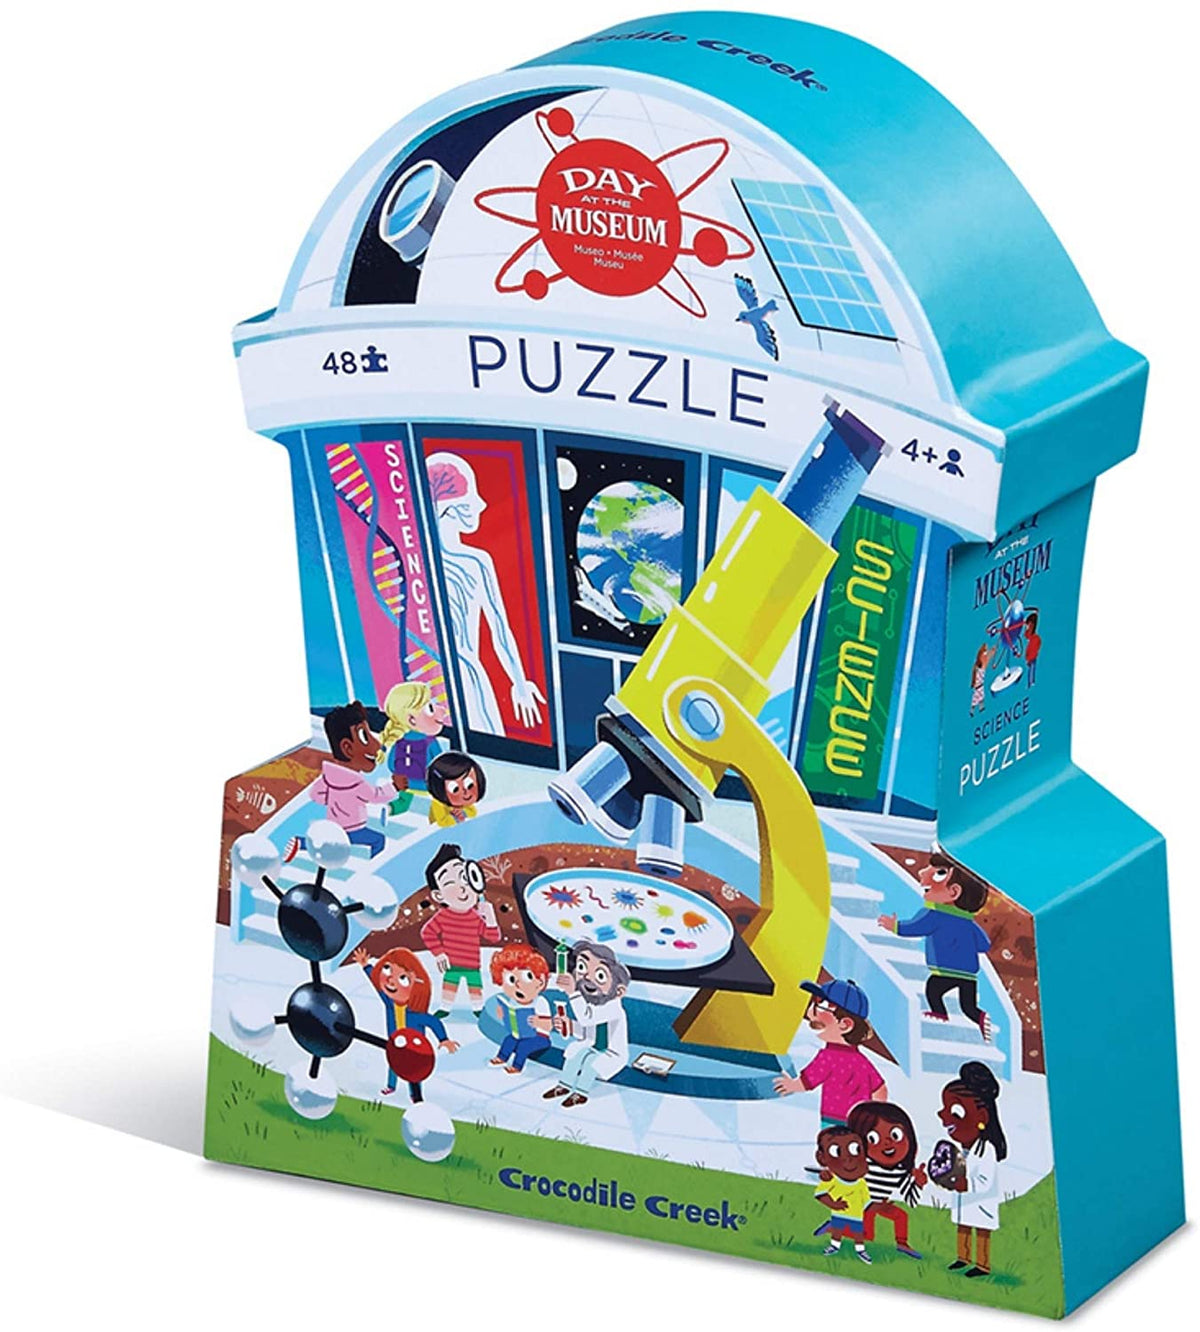 Day at the Science Museum - 48pc Puzzle Cover